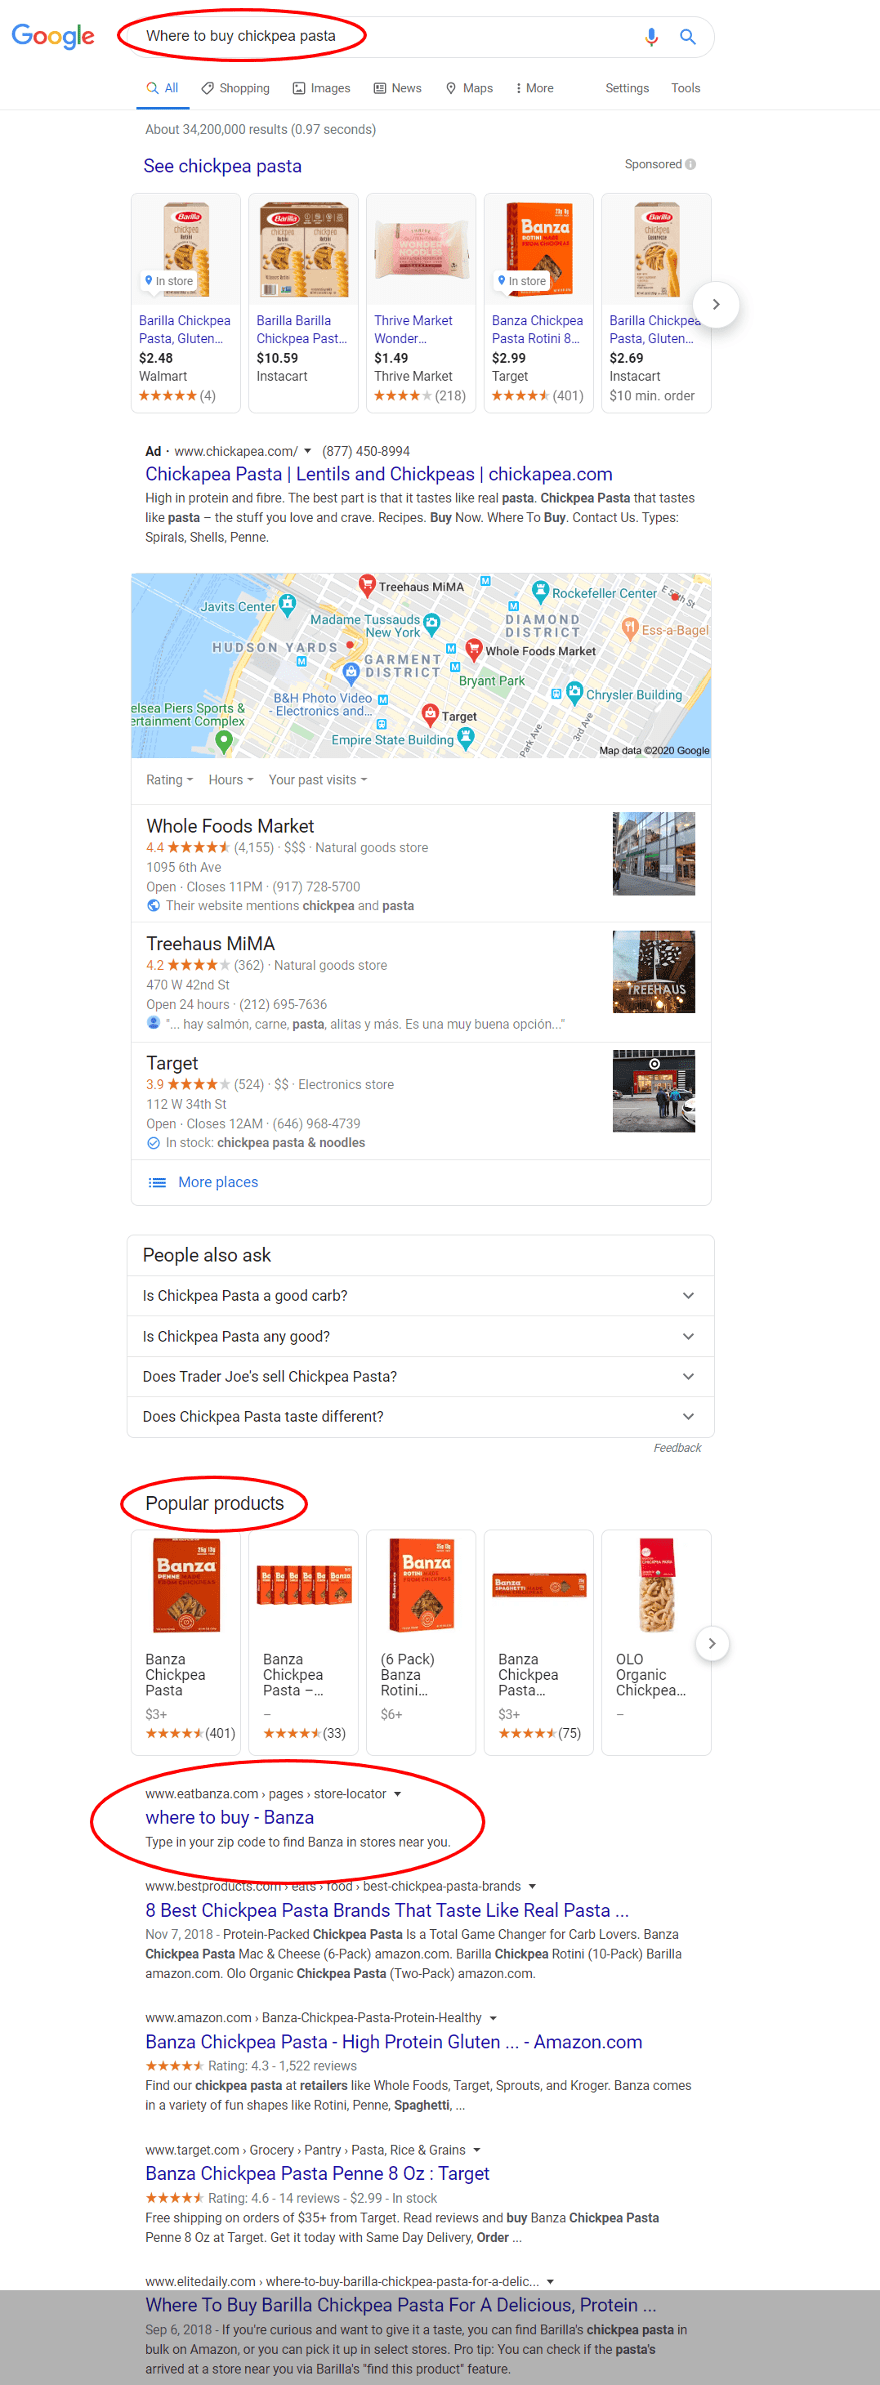 where-to-buy-chickpea-pasta-google-search-results